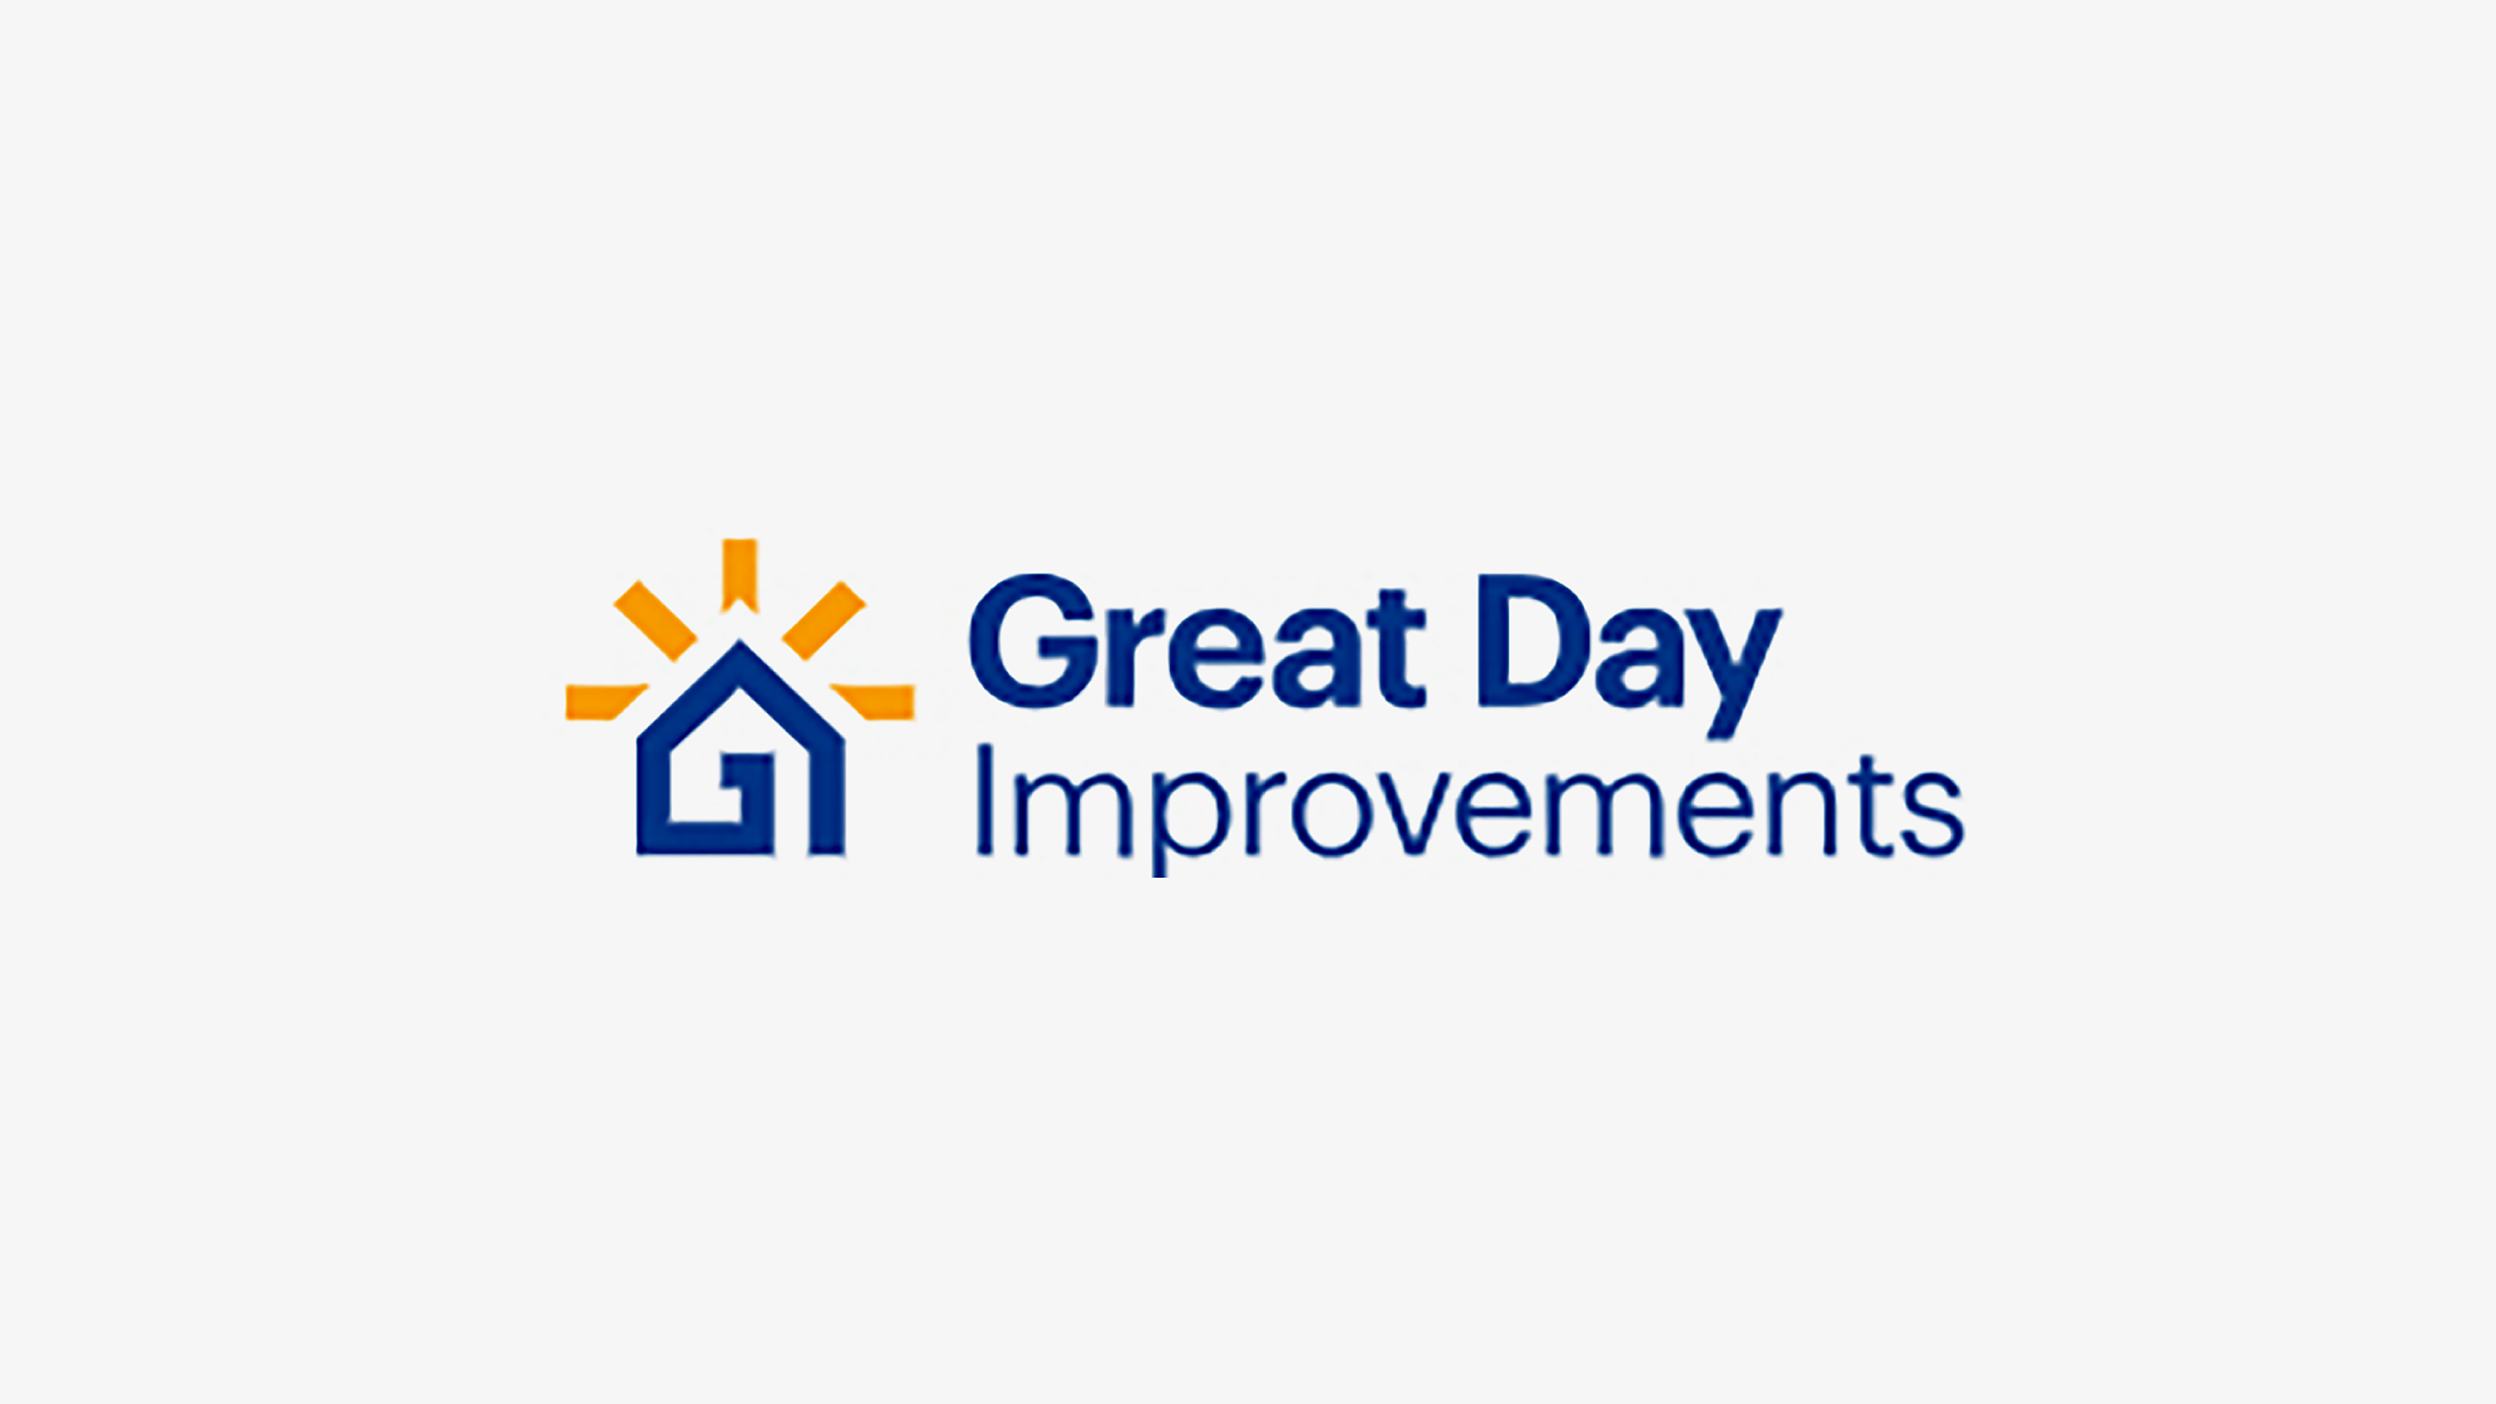 Great Day Improvements